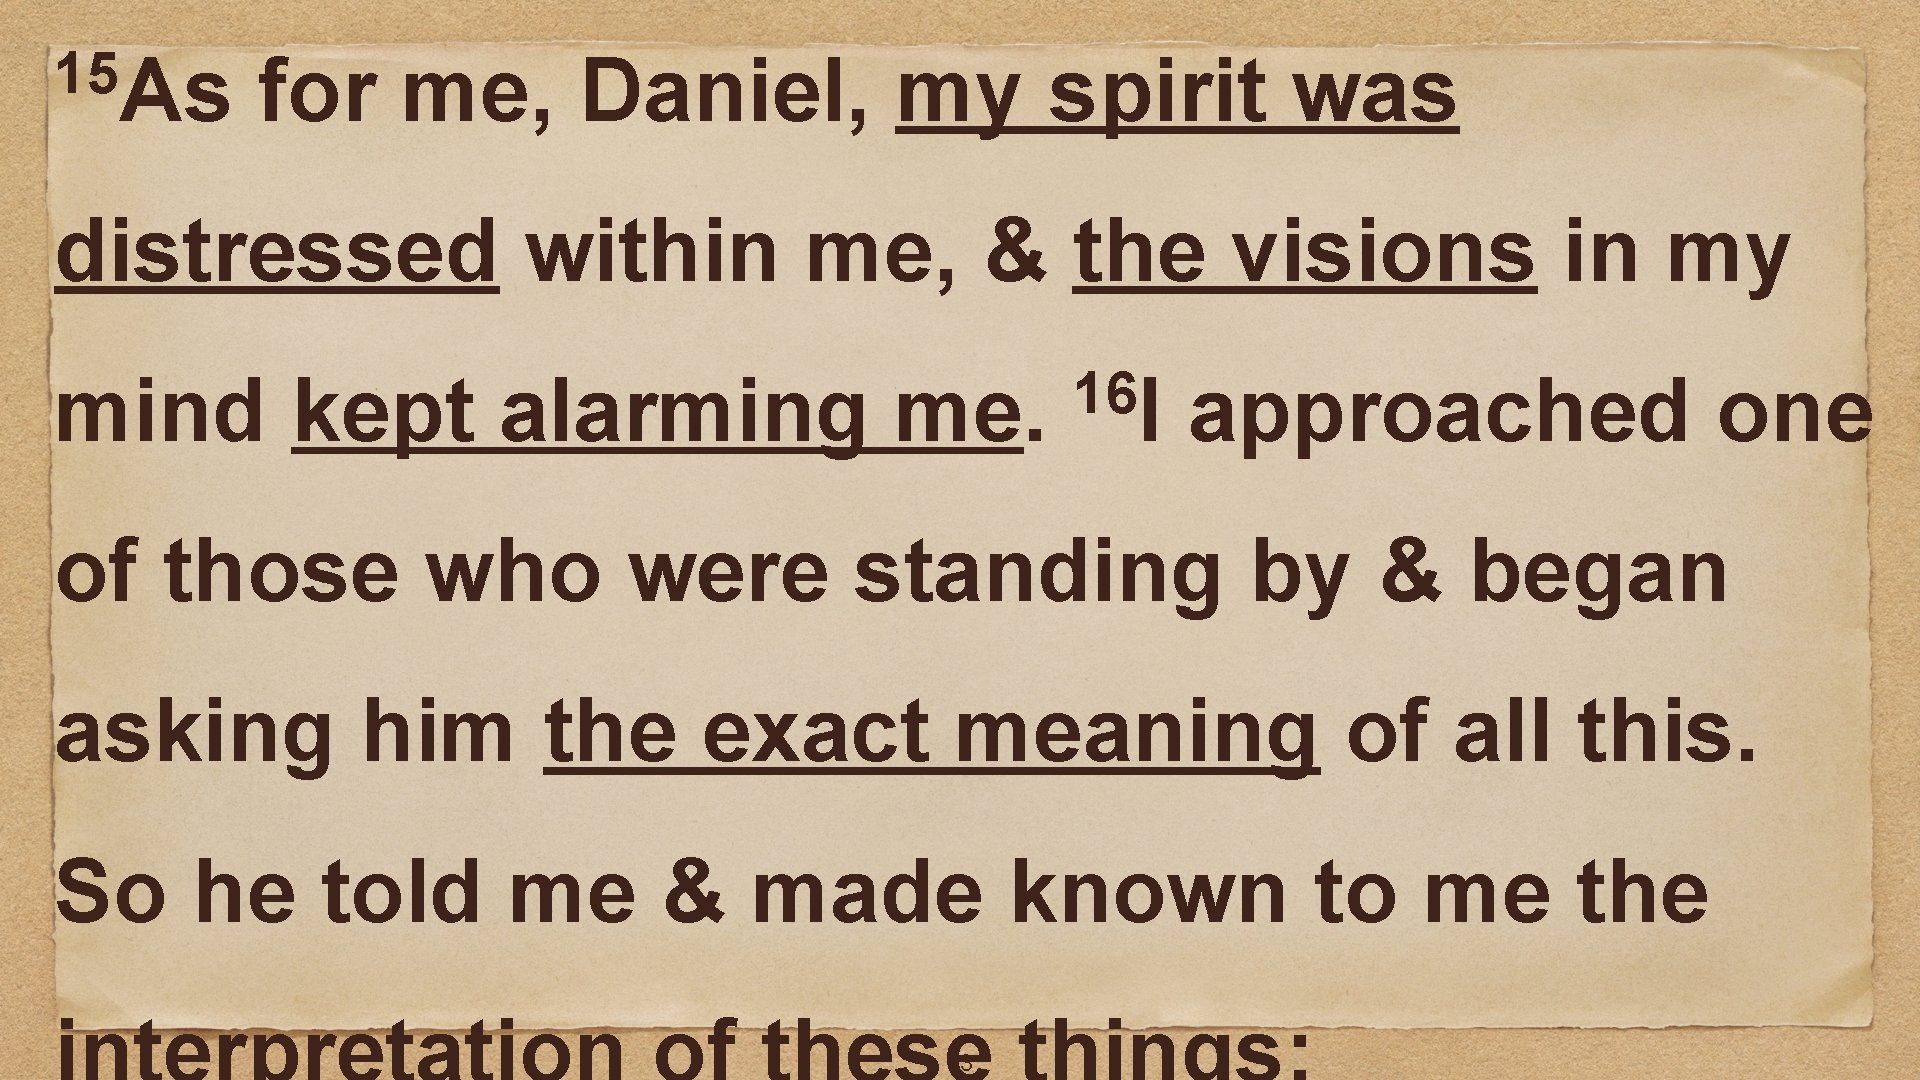 15 As for me, Daniel, my spirit was distressed within me, & the visions